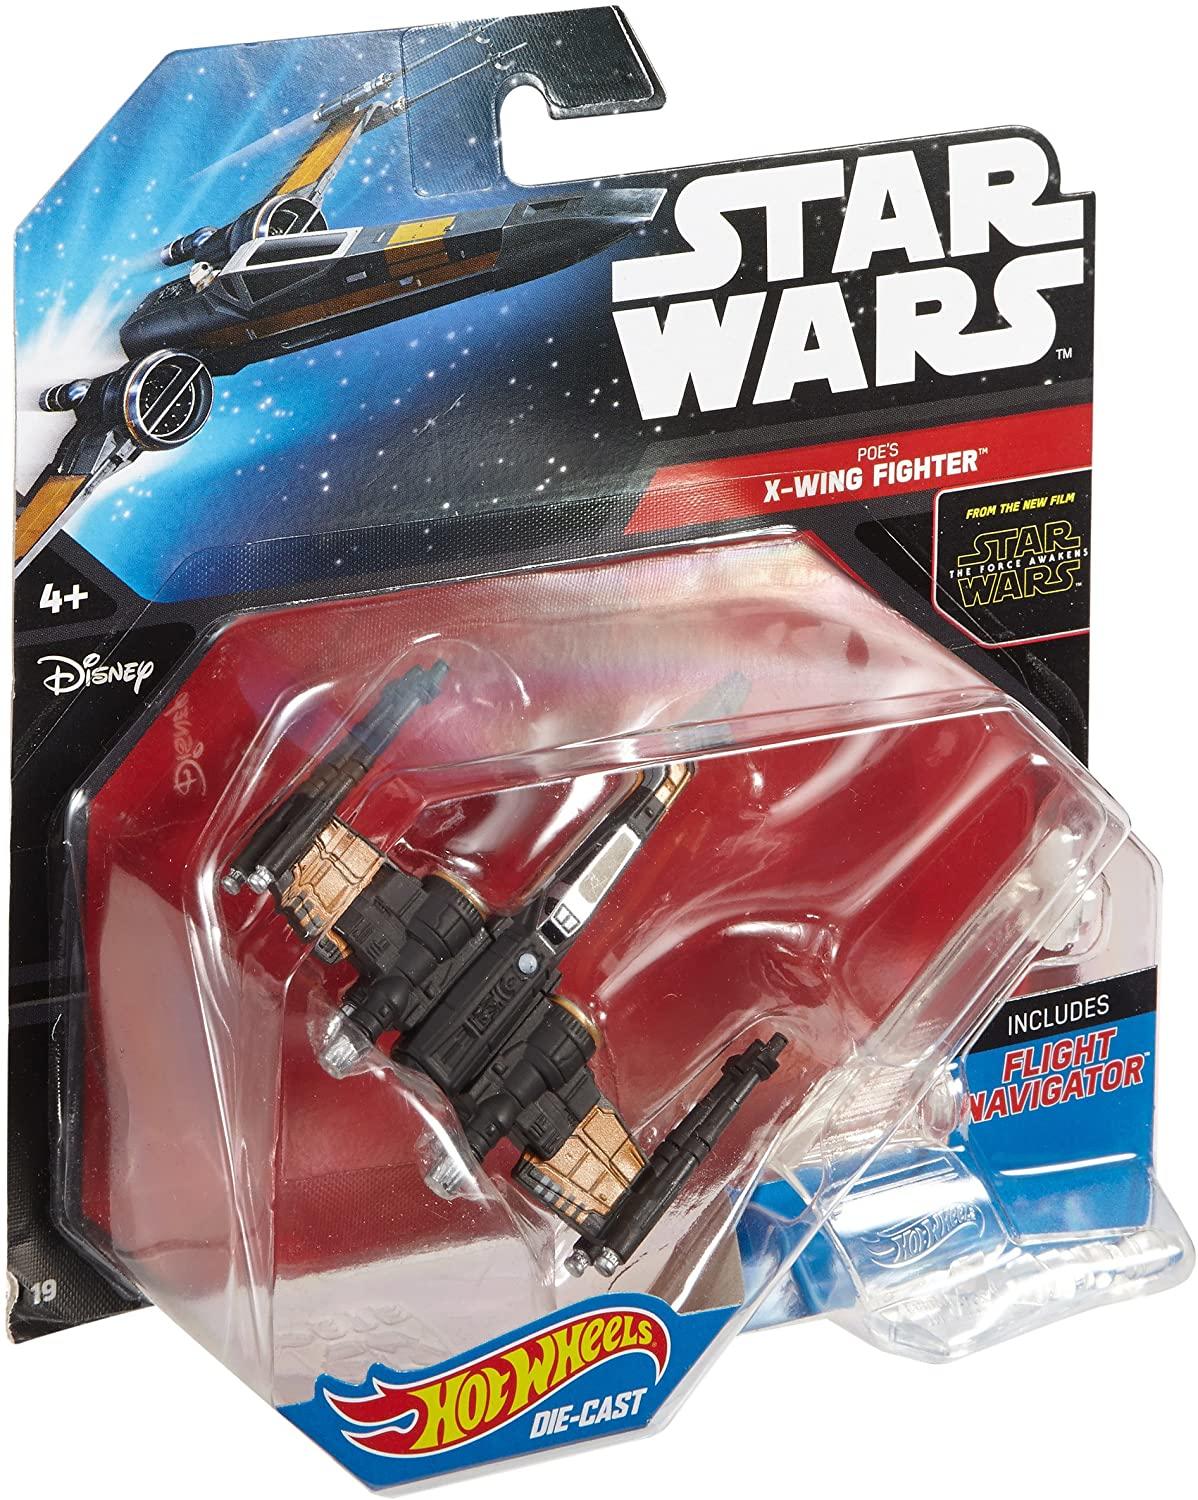 Star Wars Poe'sX-Wing Fighter from Hot Wheels